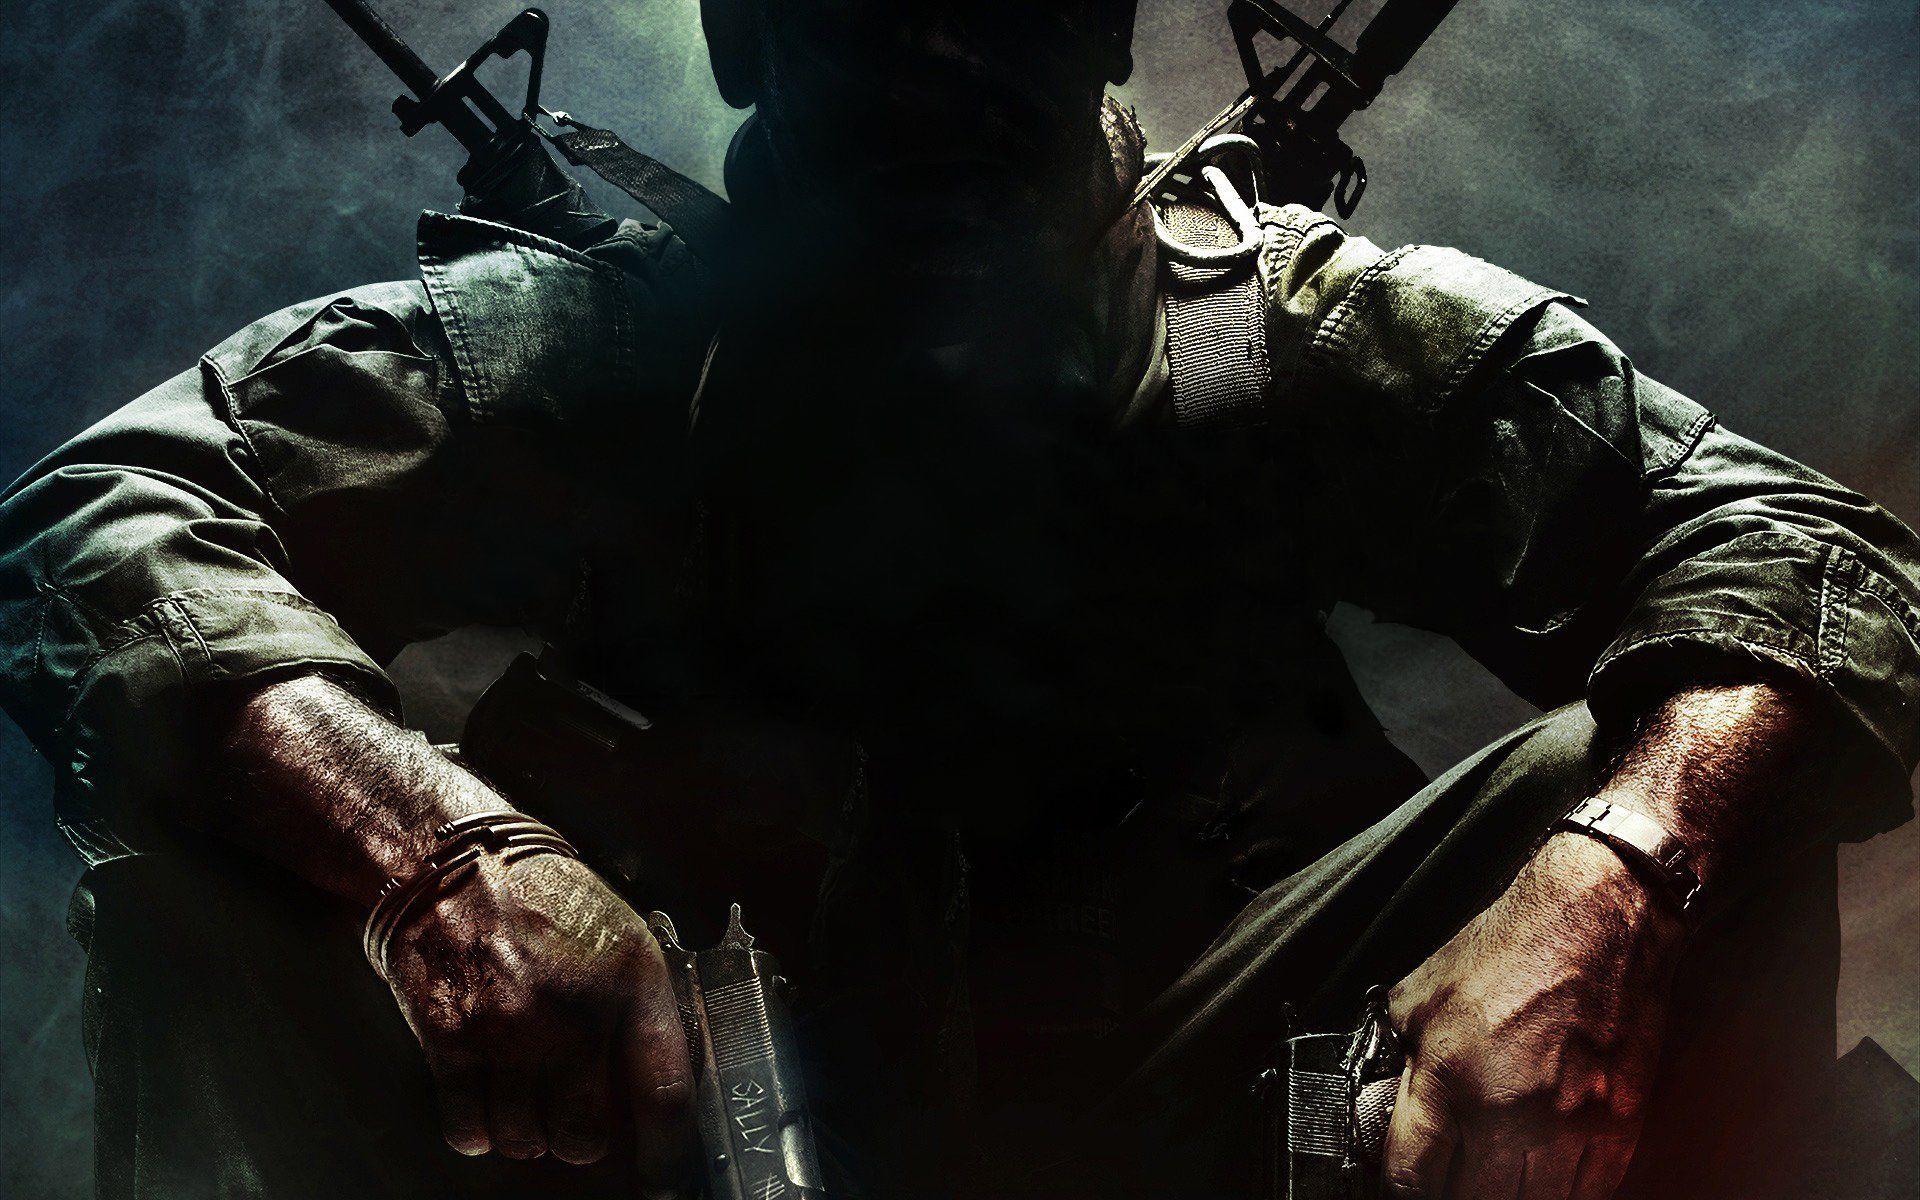 Call of Duty Black Ops Wallpapers - Top Free Call of Duty Black Ops